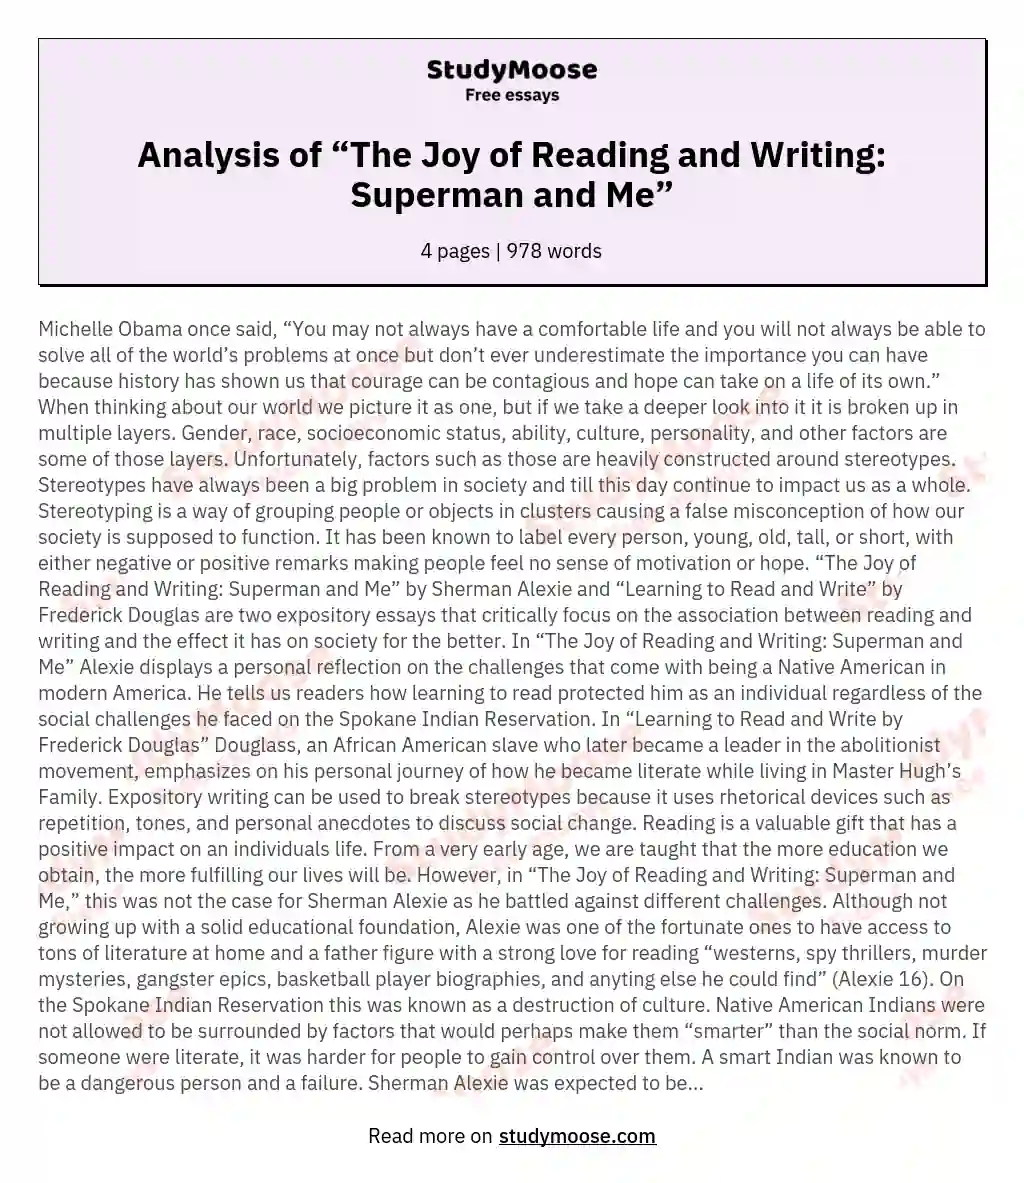 Analysis of “The Joy of Reading and Writing: Superman and Me” essay